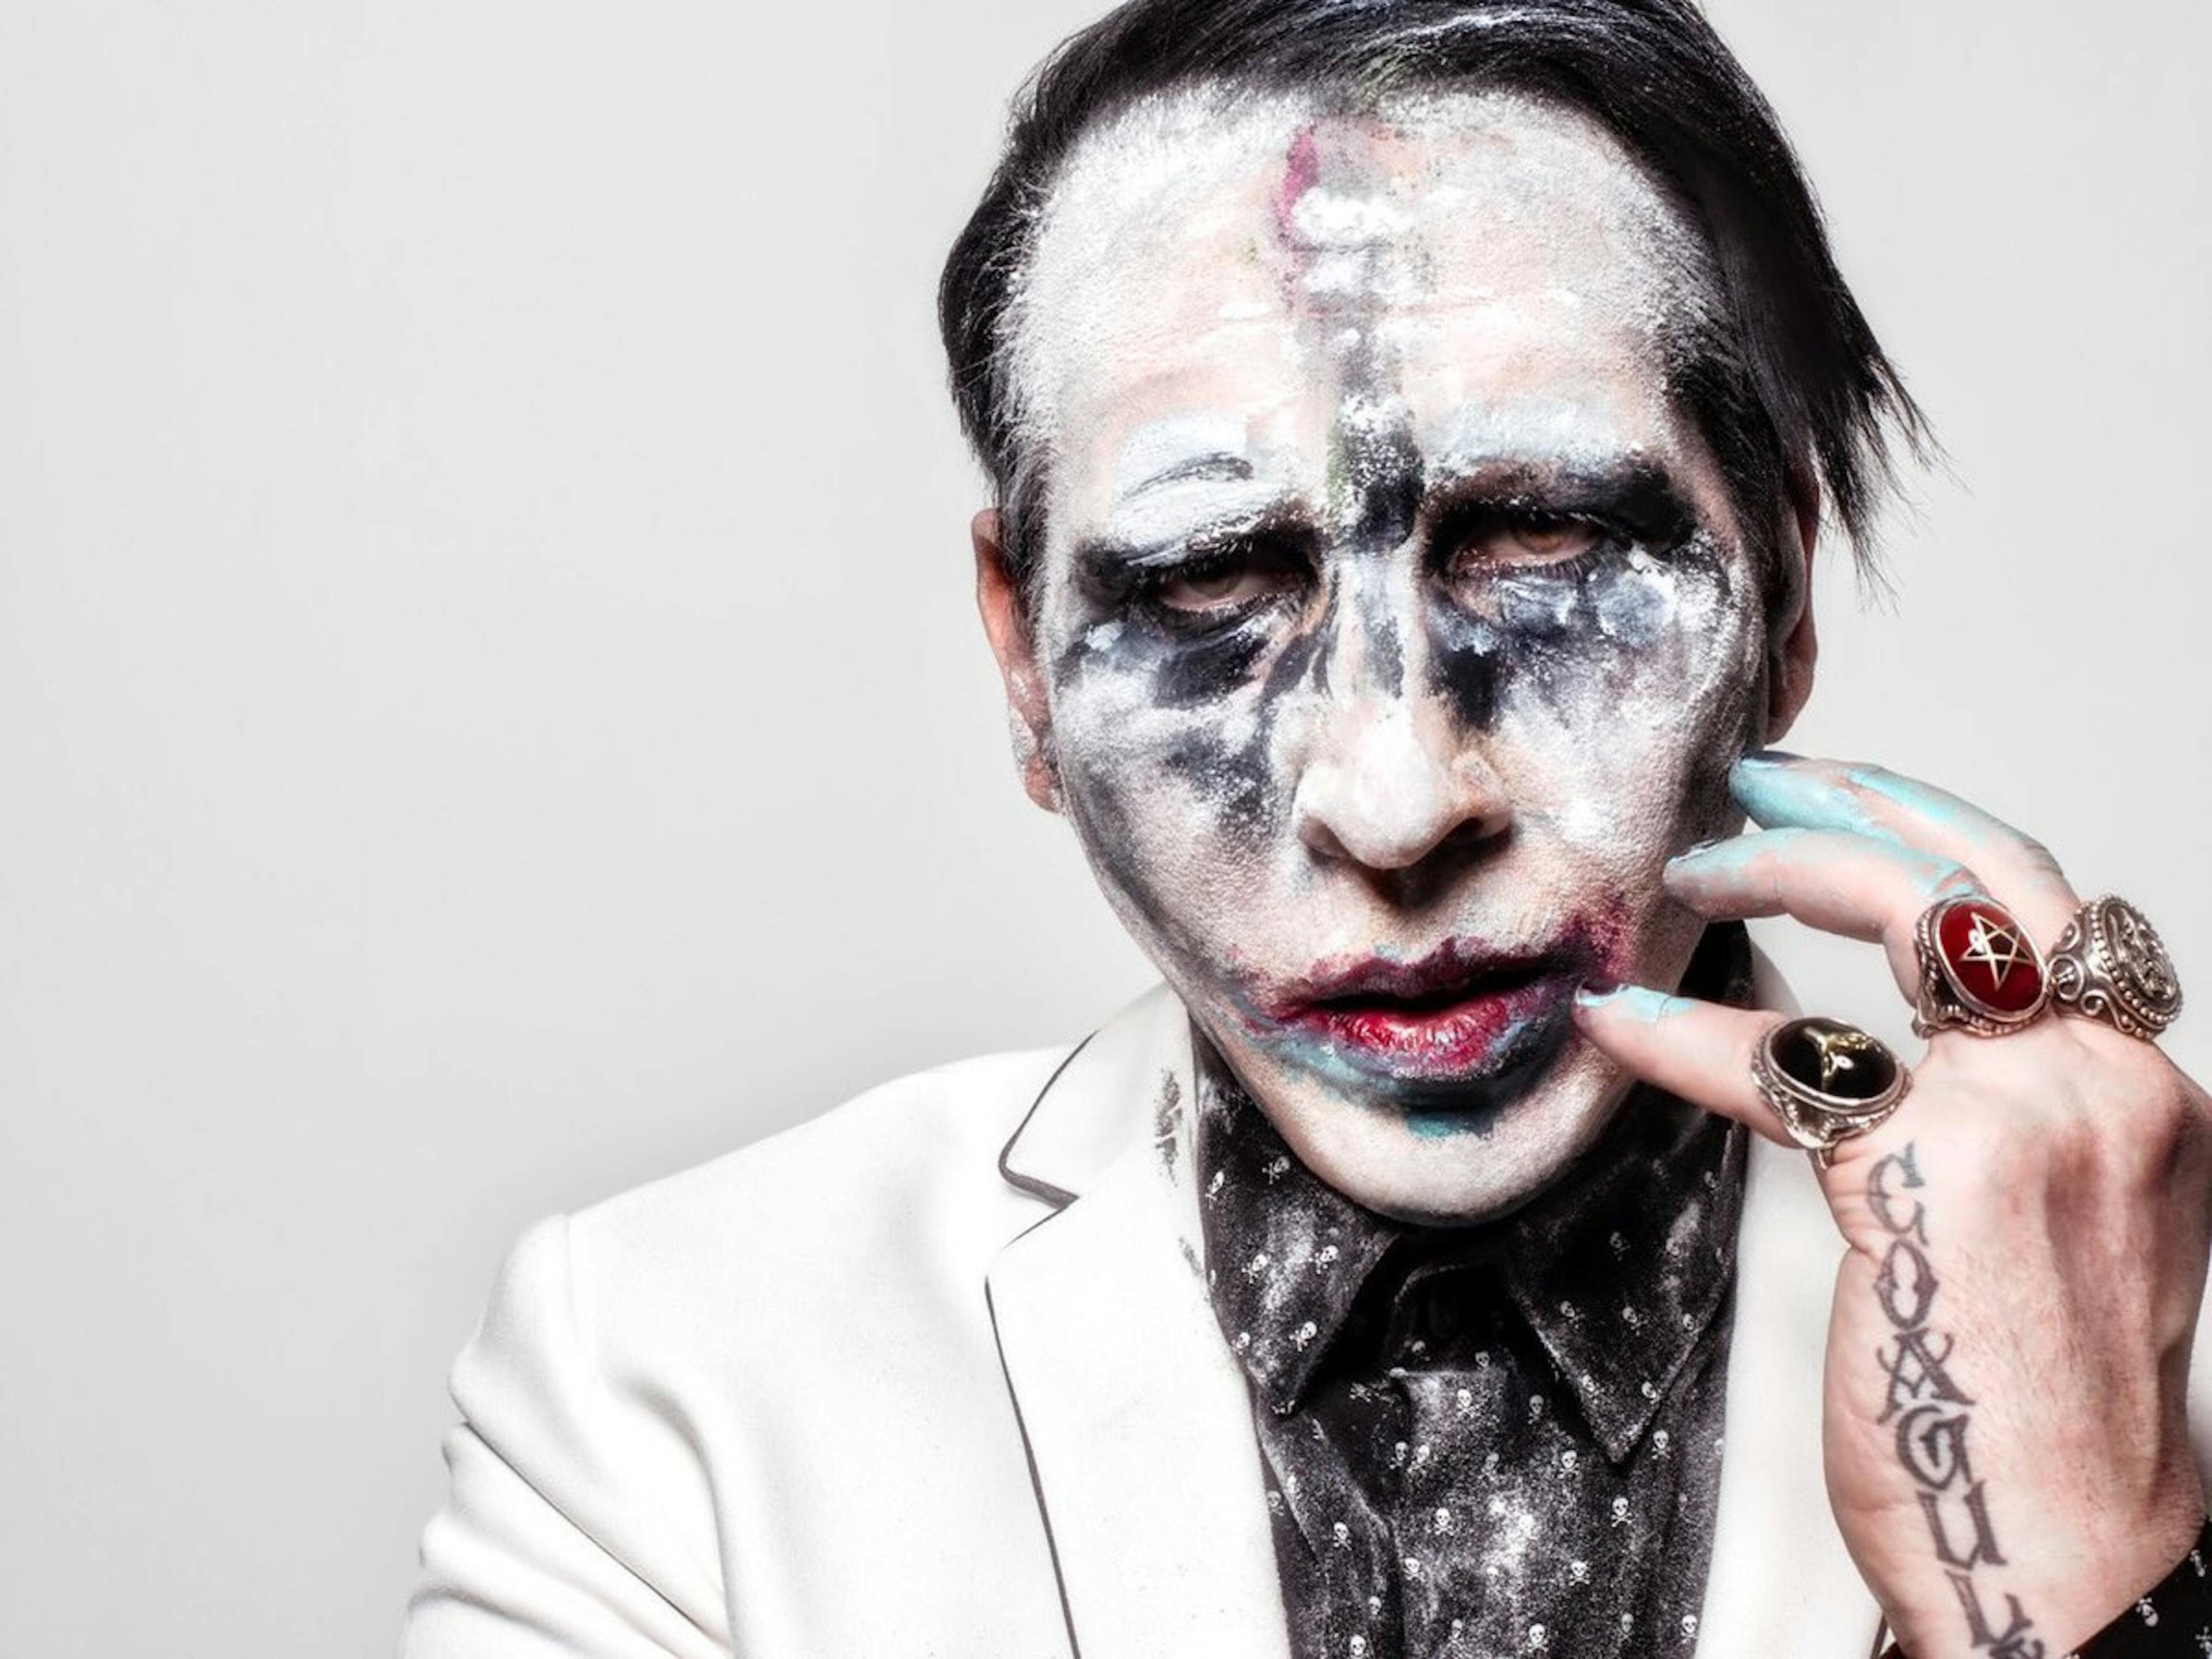 What Did Marilyn Manson Do? Brian Warner's Abuse Allegations